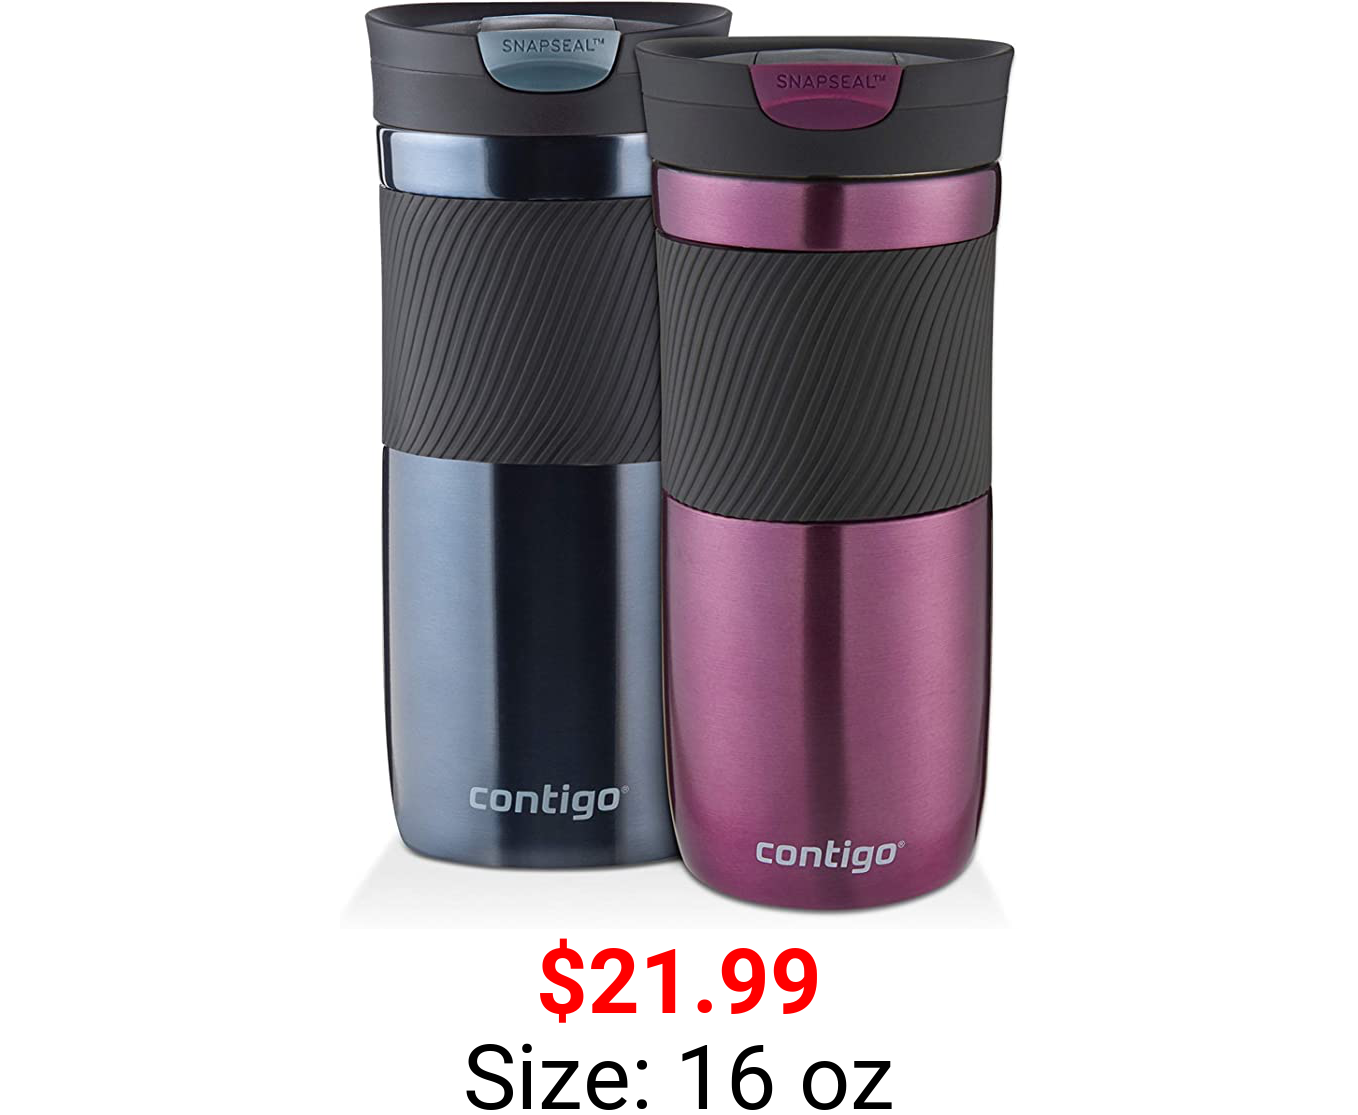 Contigo SnapSeal Byron Vacuum-Insulated Stainless Steel Travel Mug, 16 oz, Radiant Orchid and Stormy Weather